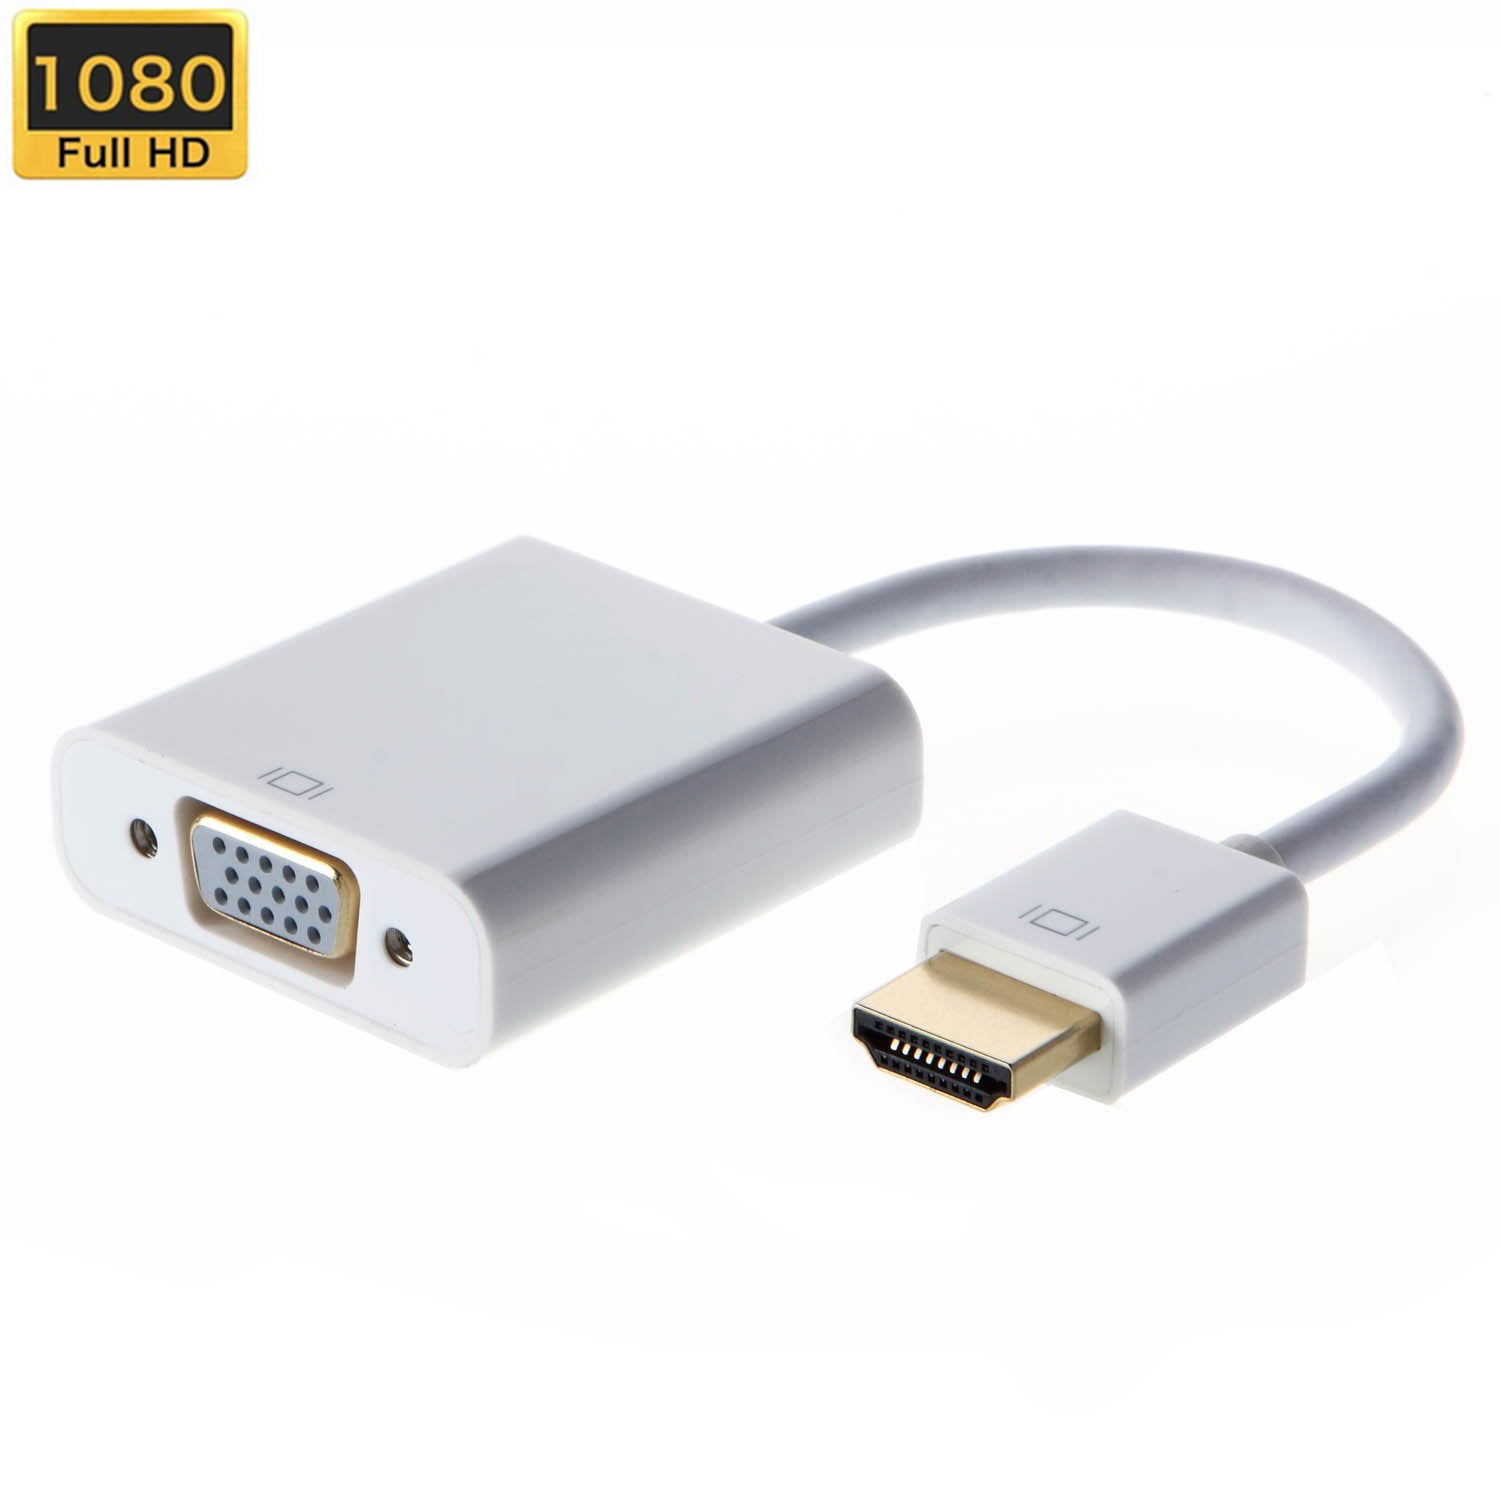 for Computer Laptop HXHANG HDMI to VGA Desktop Gold-Plated HDMI to VGA Adapter PC Male to Female HDTV,White Monitor Projector 